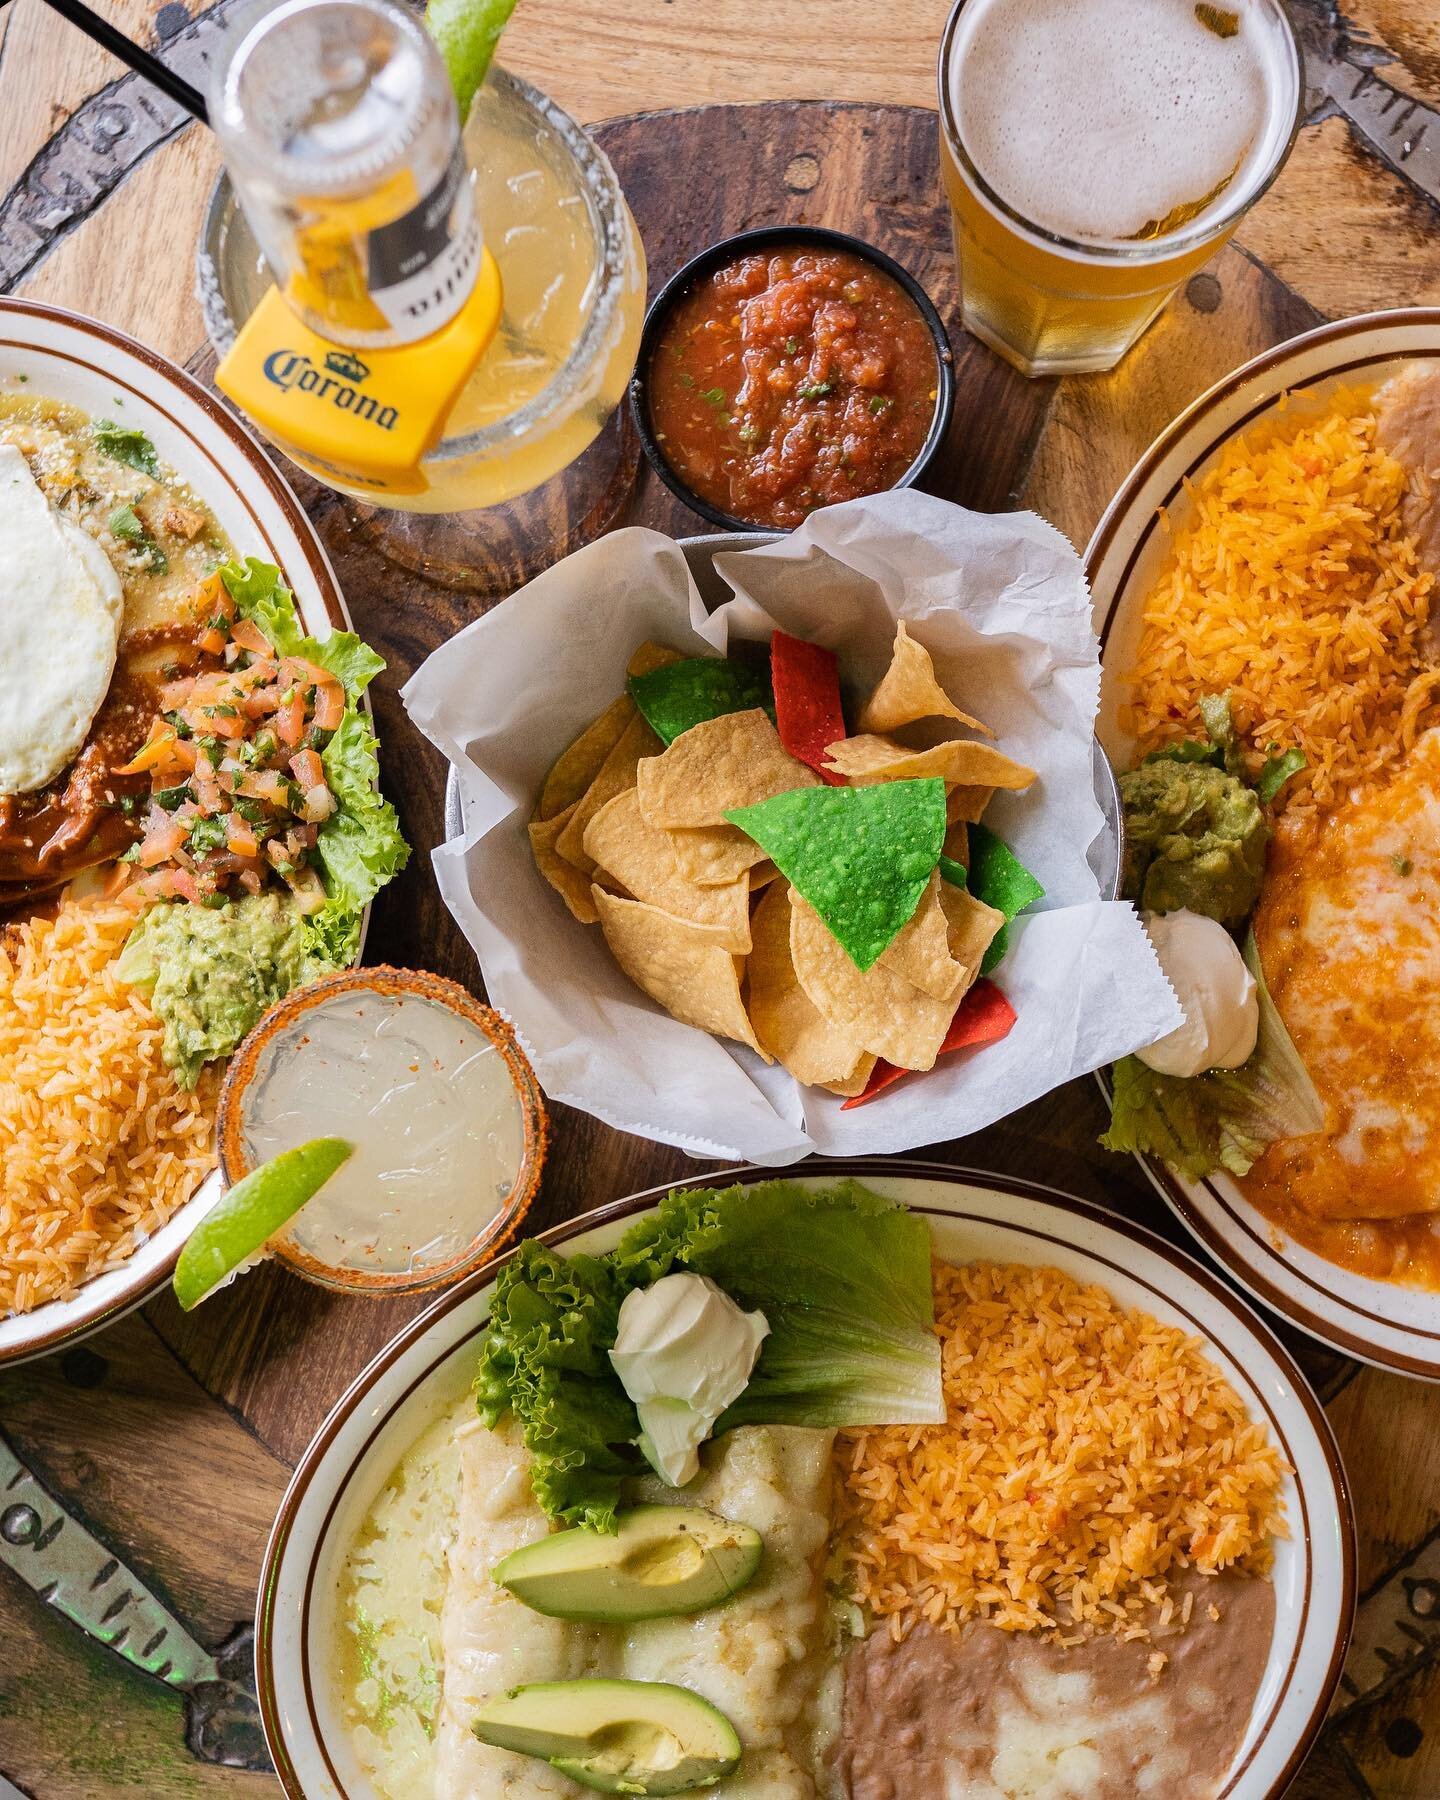 🎉Did You Know We Serve To-Go Family Meals? 🌮🌯🥰

We Have Theee different Meals To Choose From! 

🎉LOS REYES FAMILY MEAL $75
2 Pounds of meat of your choice; Steak,  Carnitas, Grilled Chicken, or Chile Verde. 8 Cheese Enchiladas, 32 oz. Rice, 32 o